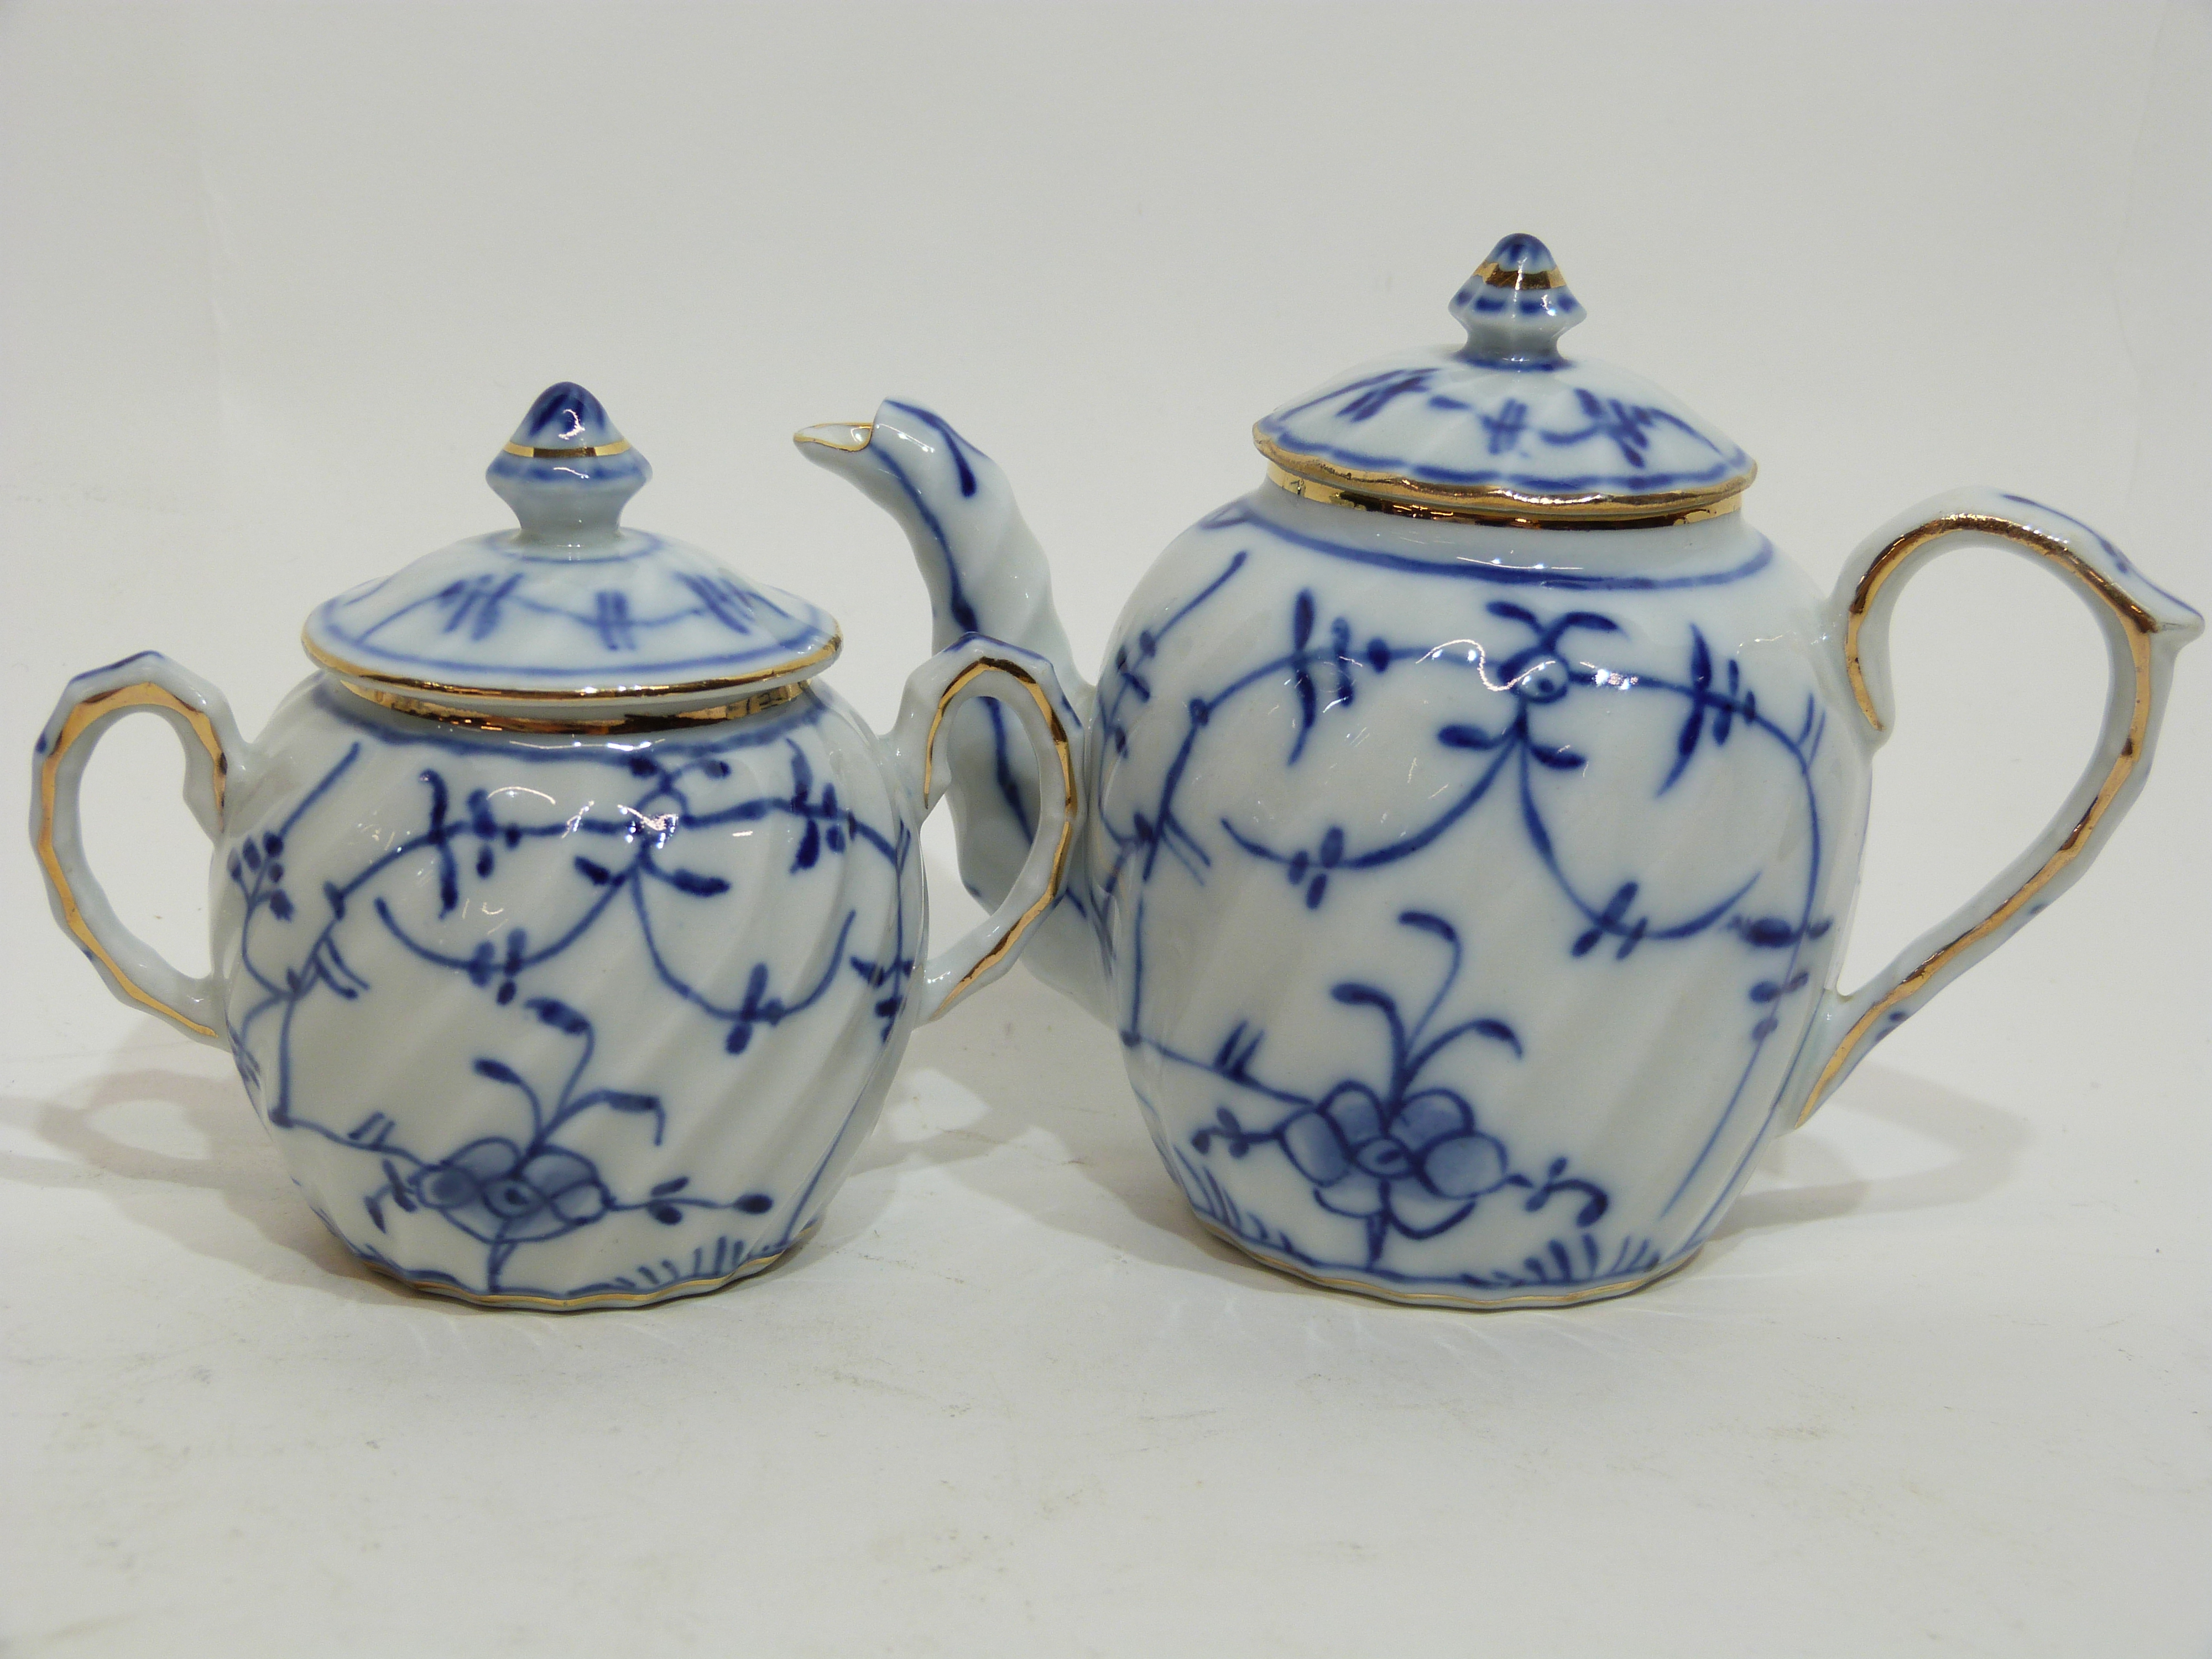 Miniature tea set with a blue design in Meissen style comprising small tea pot, sucrier and cover, - Image 6 of 6